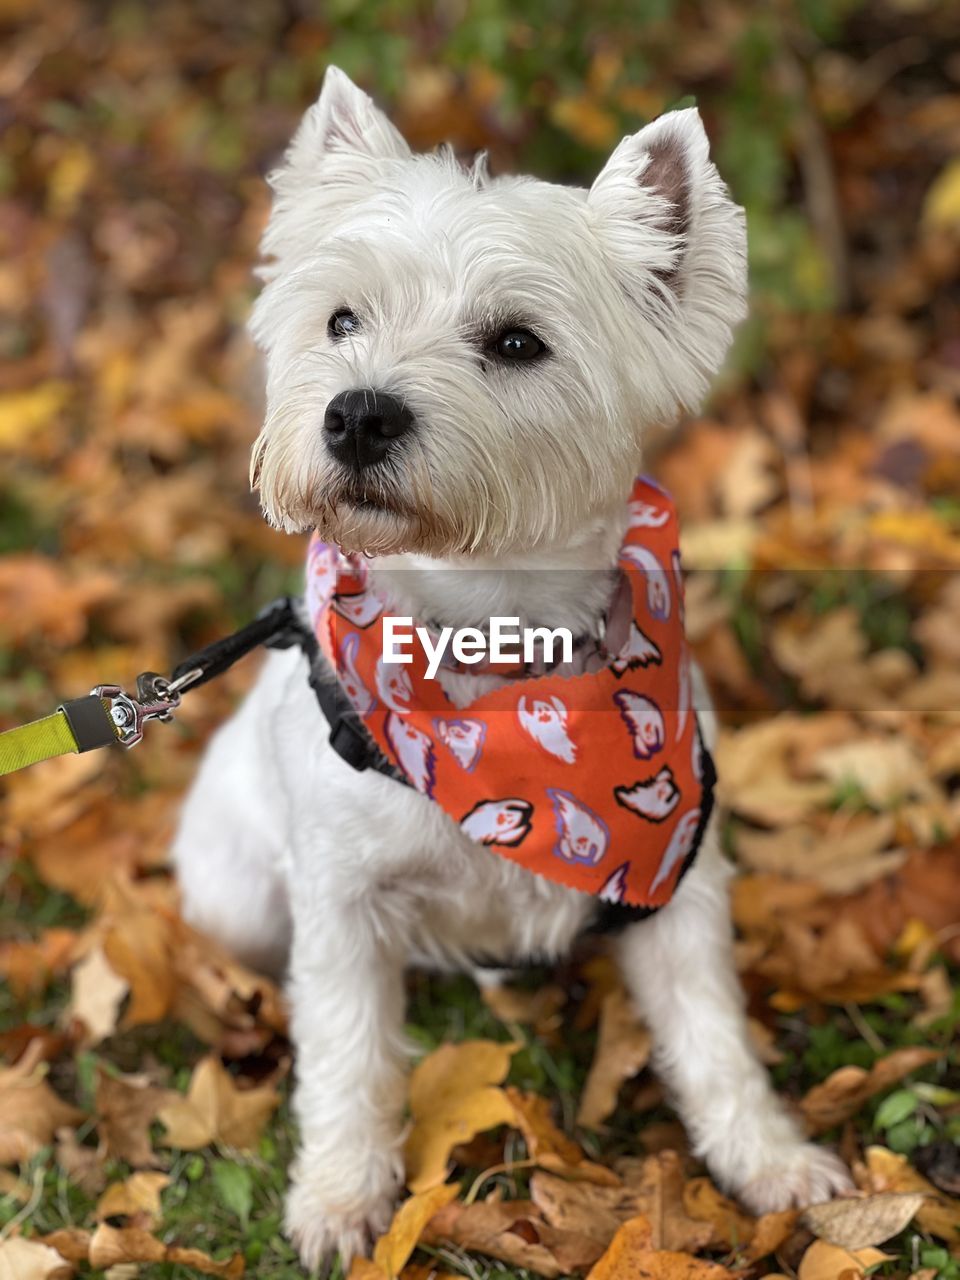 dog, canine, domestic animals, pet, mammal, animal themes, one animal, animal, west highland white terrier, terrier, autumn, lap dog, portrait, cute, collar, clothing, carnivore, puppy, leaf, pet collar, plant part, nature, white, young animal, no people, plant, focus on foreground, looking at camera, purebred dog, pet clothing